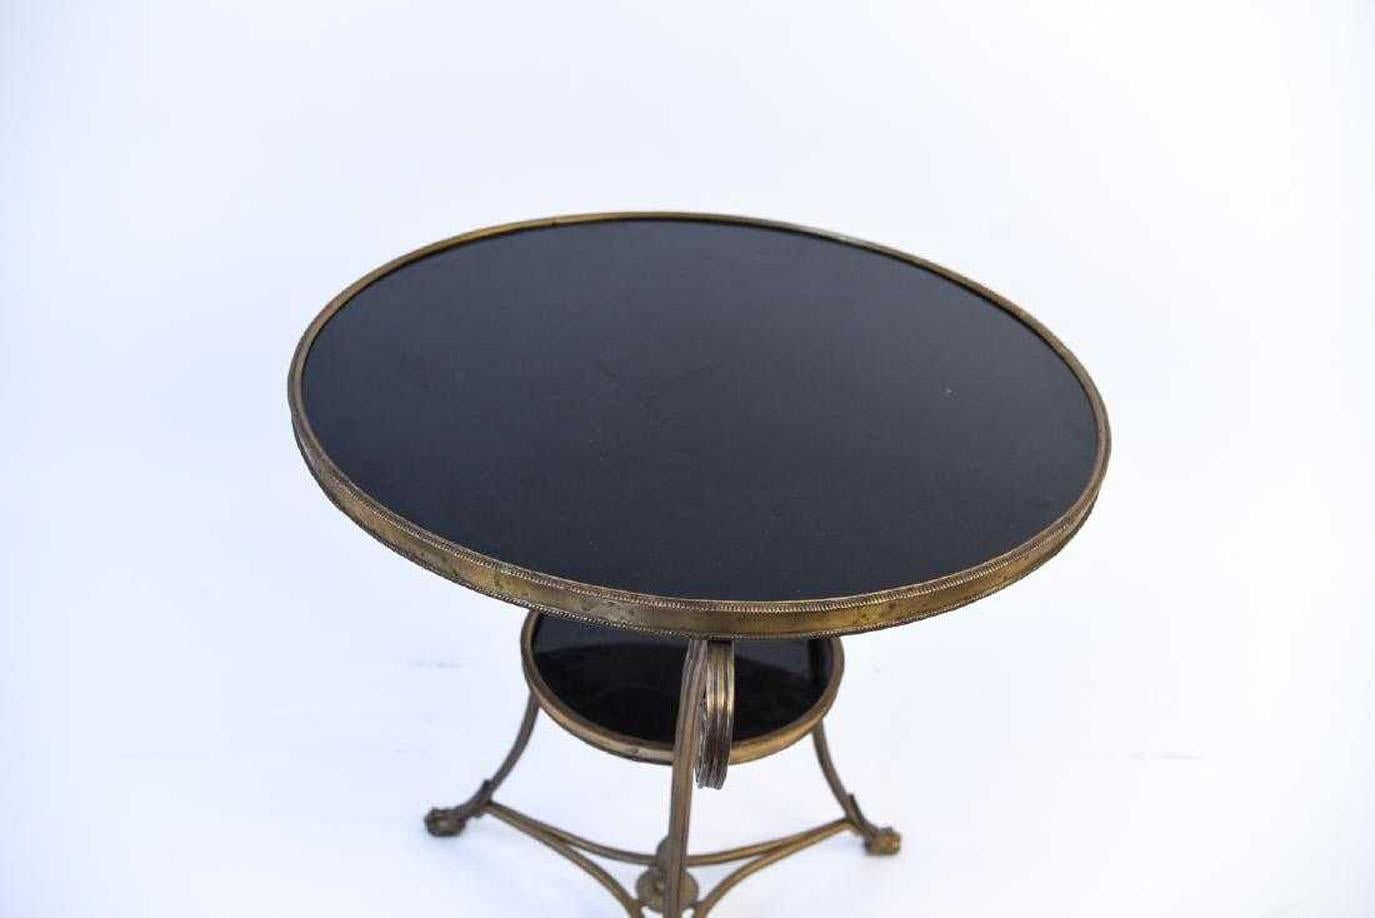 A French mid-20th century Directoire style guéridon brass table with stone top and lower tier. The table is raised on three saber-shaped legs, beautifully scrolled in their upper section and resting on lion paw feet. The legs are connected to one